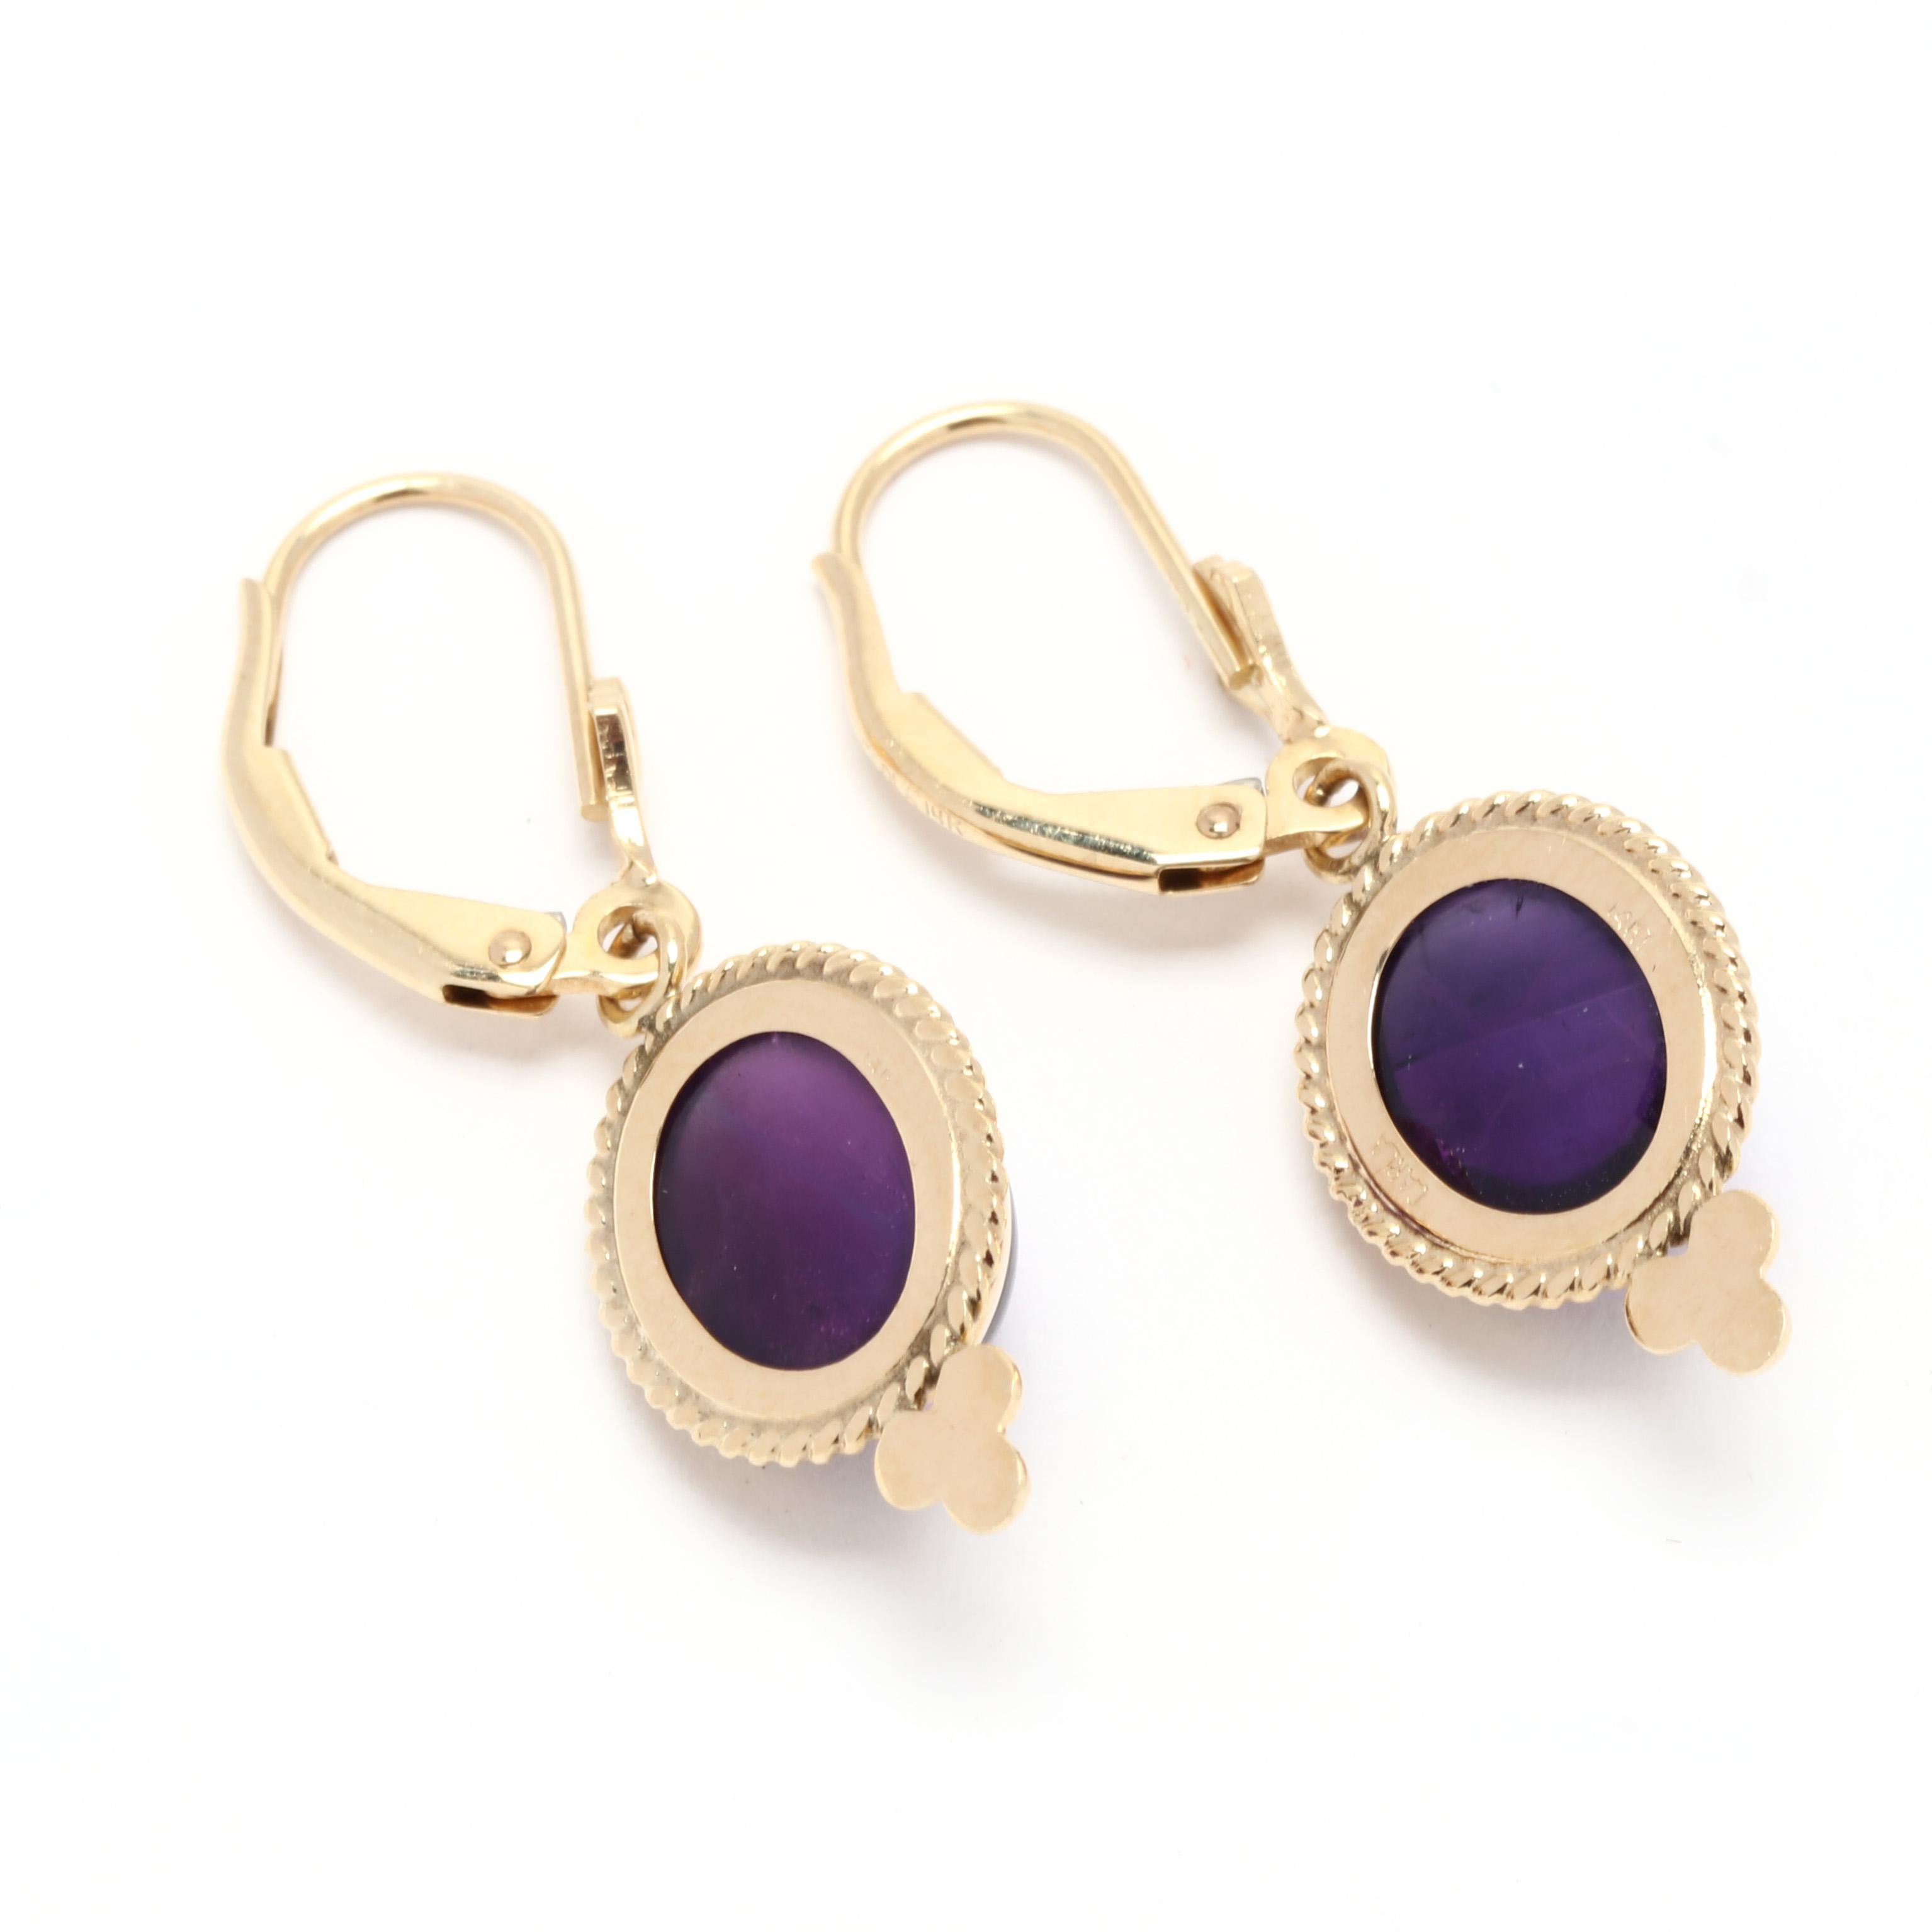 A pair of vintage 14 karat yellow gold cabochon amethyst dangle earrings. These February birthstone earrings feature bezel set, oval cabochon cut amethysts weighing approximately 6.90 total carats with a rope motif halo and suspended from a pierced